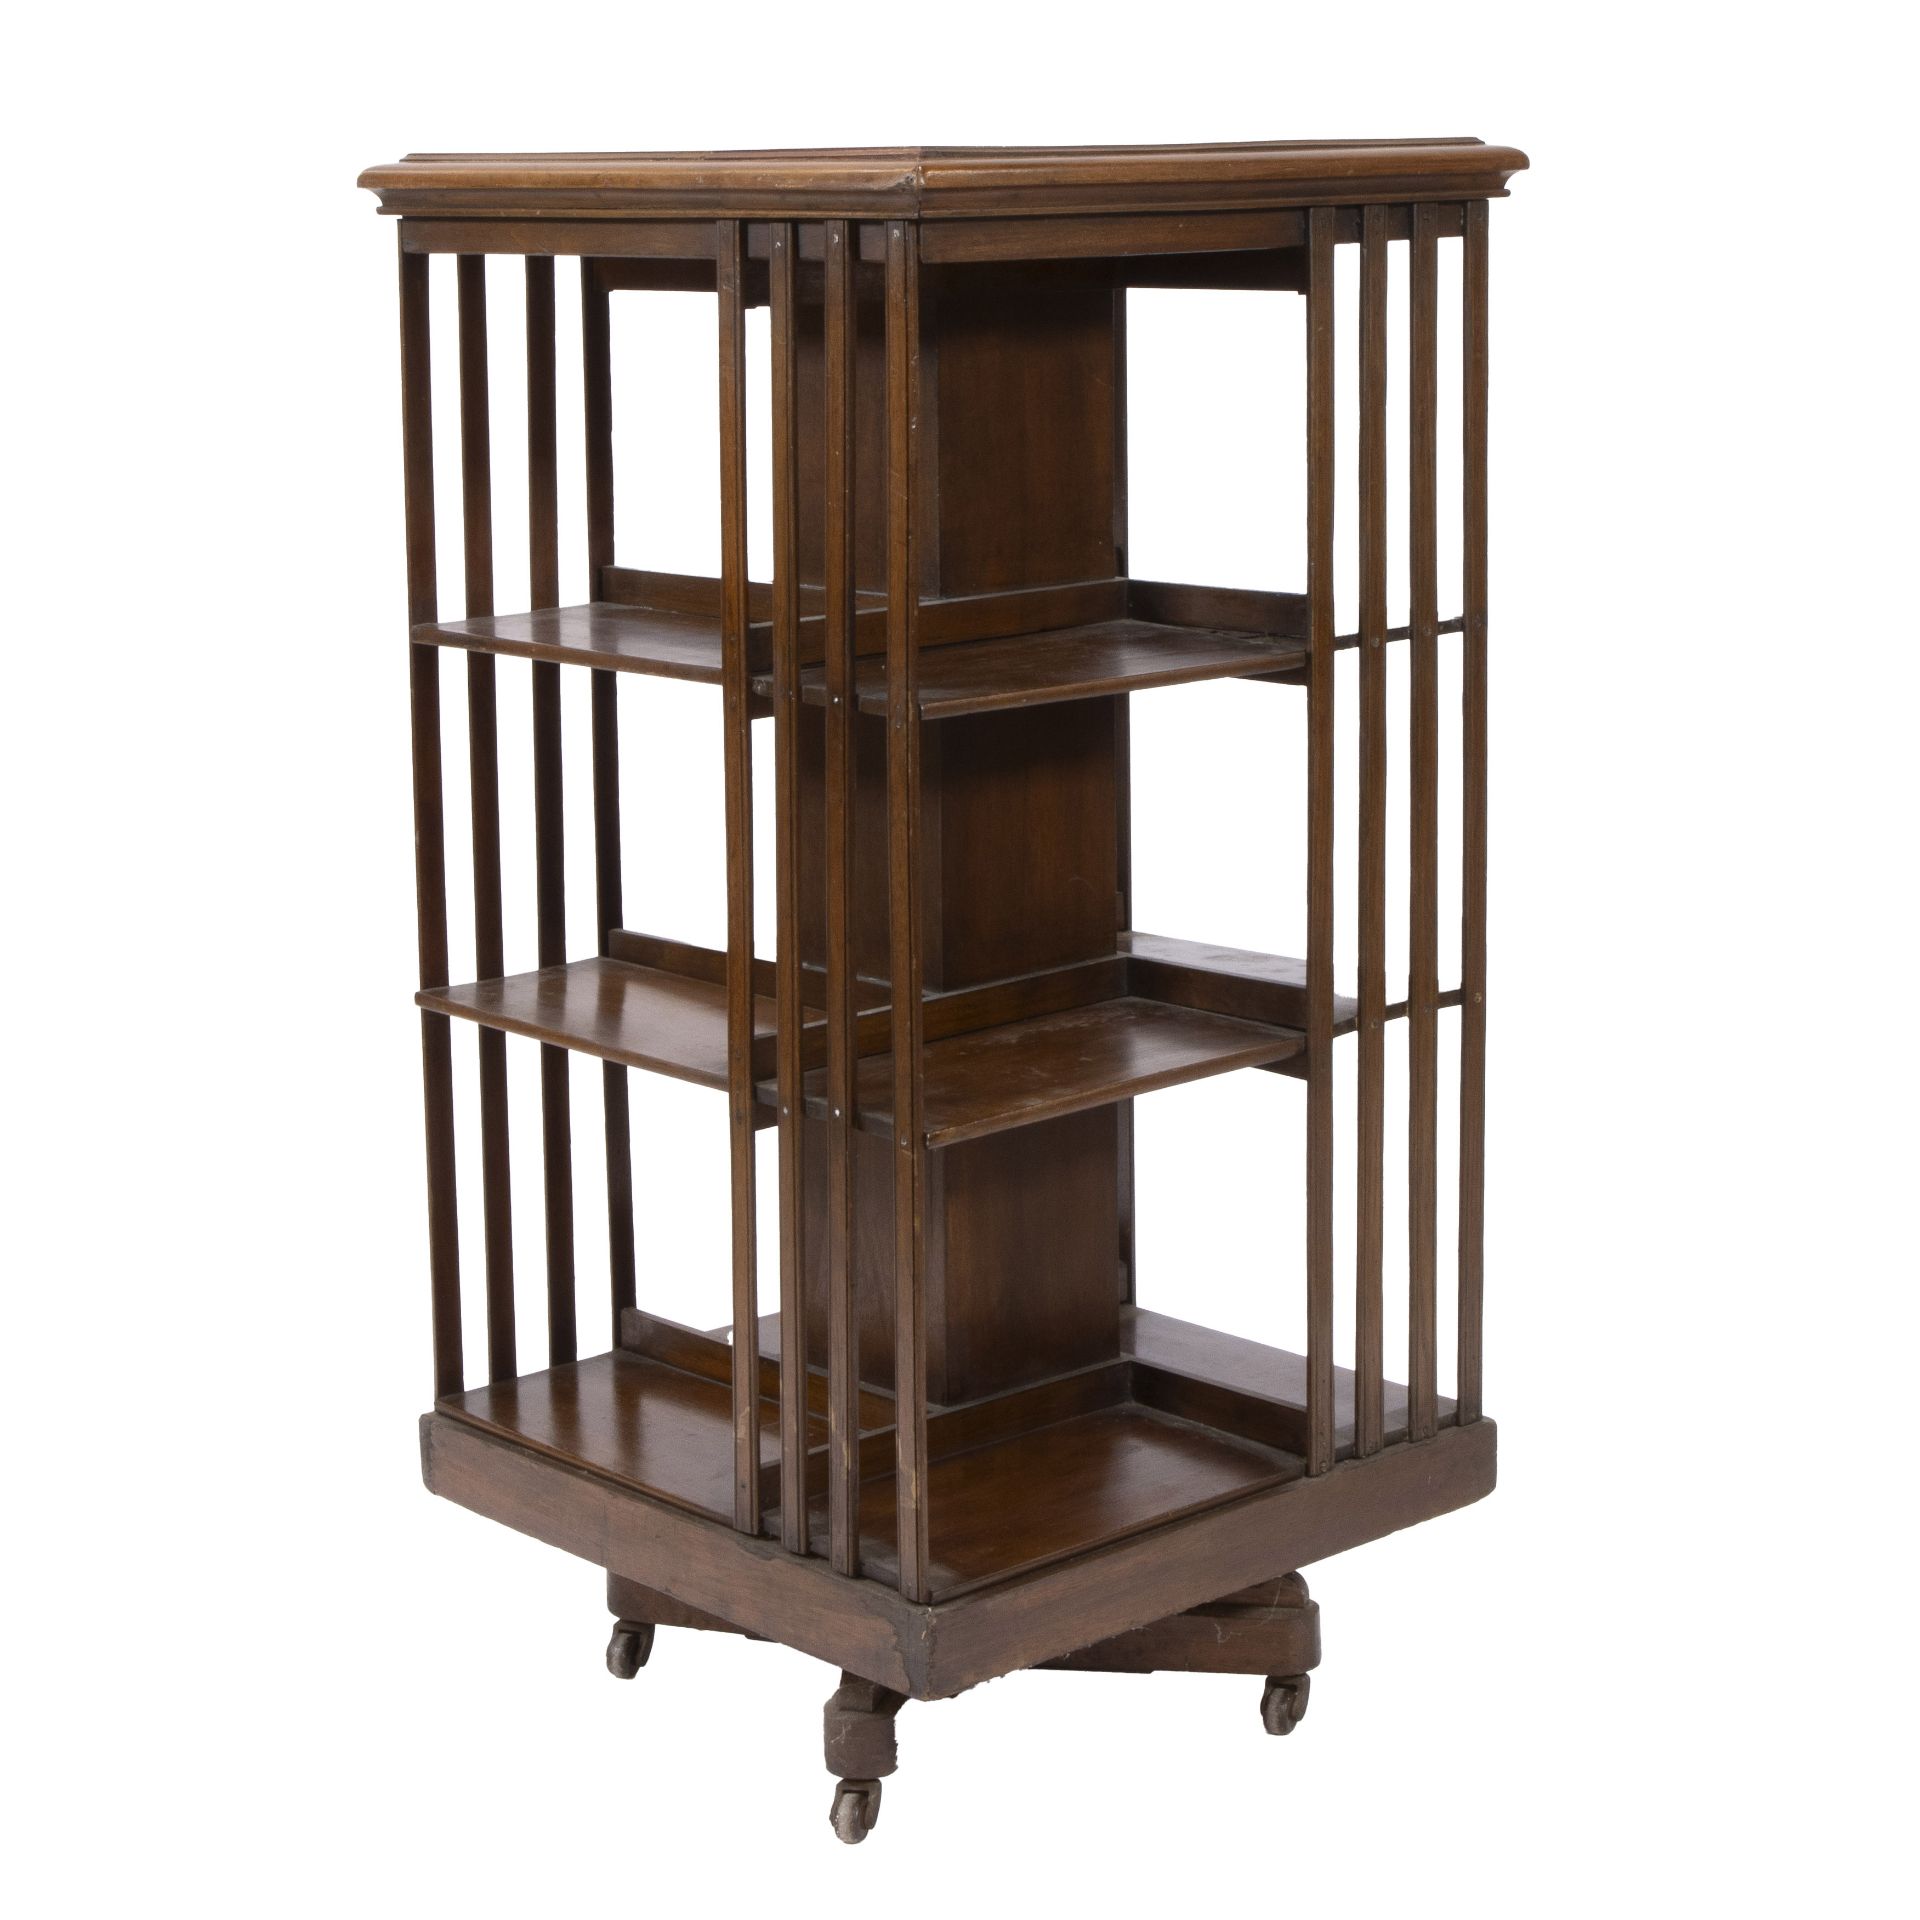 English oak bookmill with 3 levels and resting on castors, early 20th century - Bild 2 aus 6